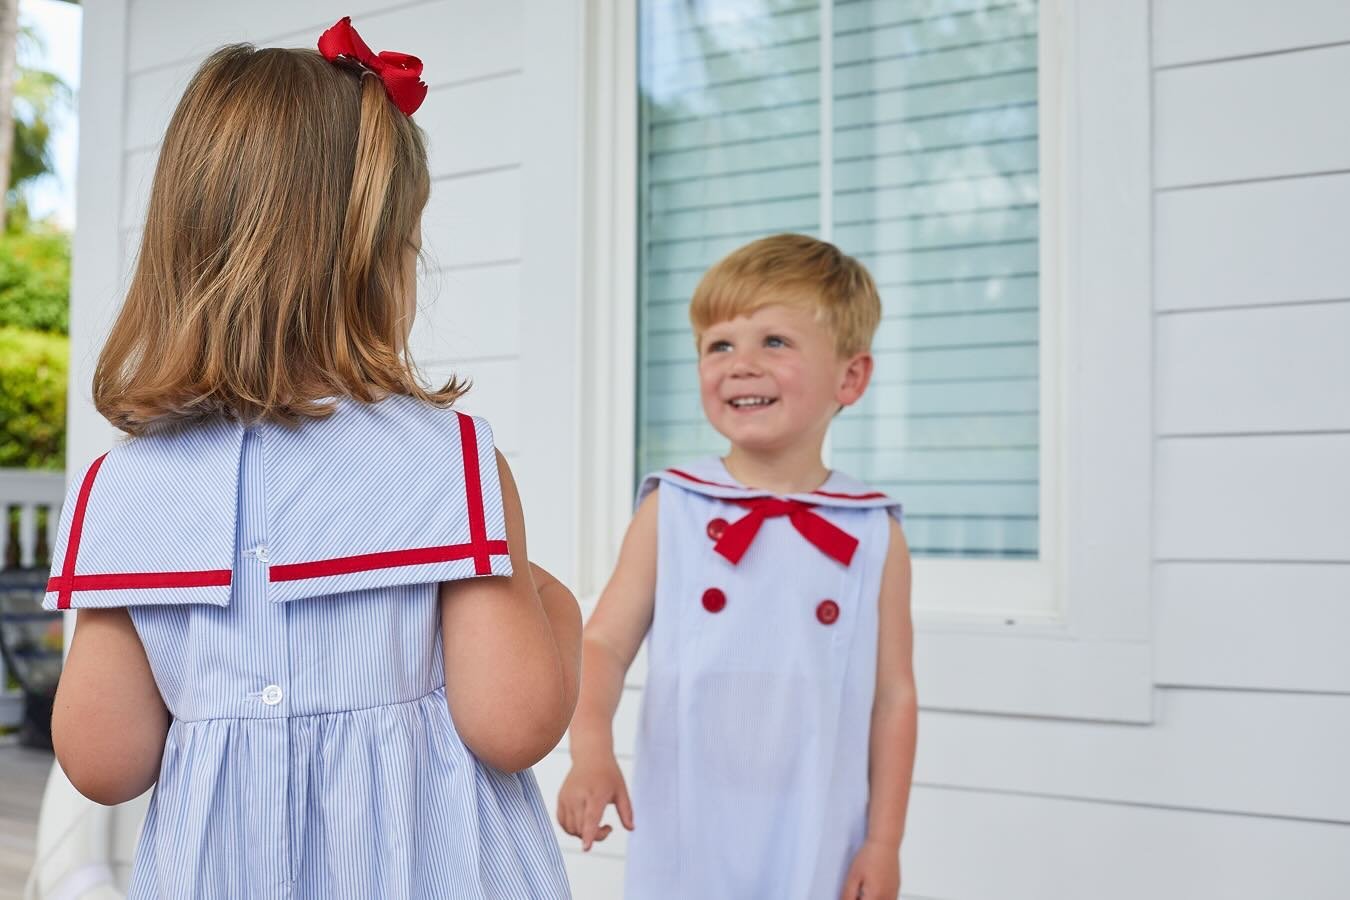 The sweetest collection by @littleenglishclothing ⛵️
Classic sailor look and perfect for beach photos.
.
.
#childrensshop #childrensshopatl #littleenglishclothing #sailorlook #matchingkids #shoplocal